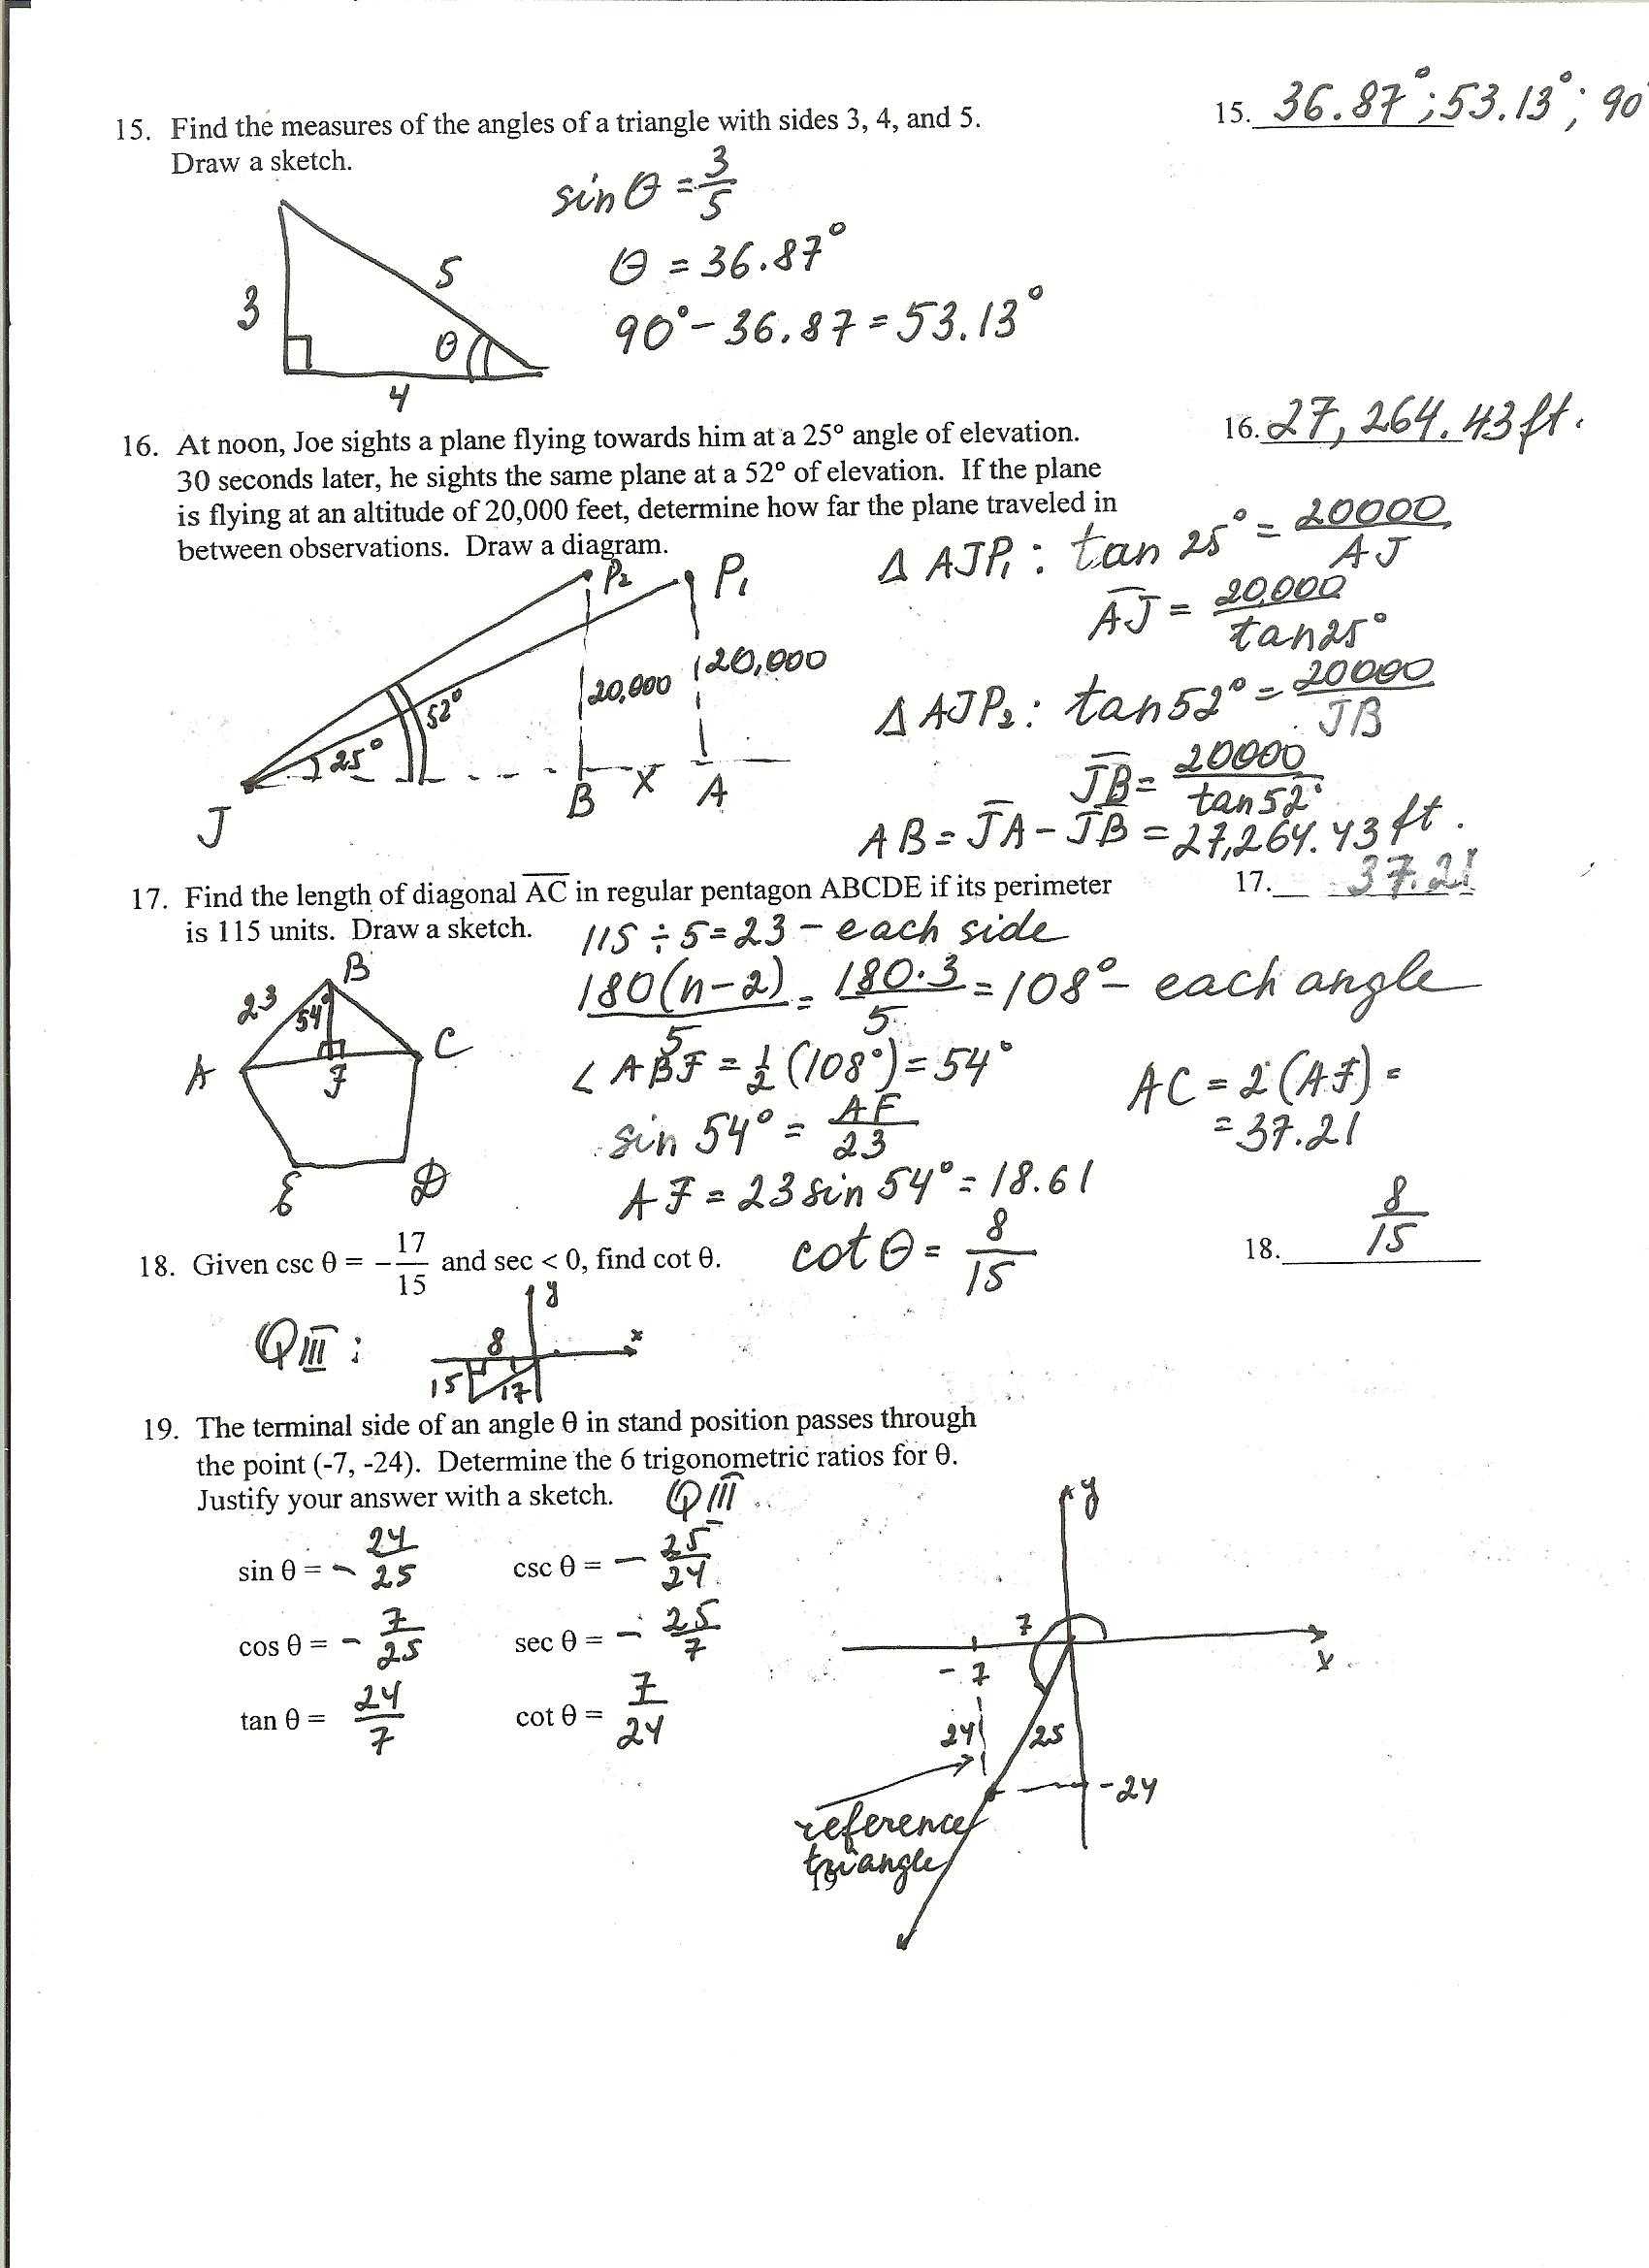 Graphing Exponential Functions Worksheet Answers together with Precalculus Honors